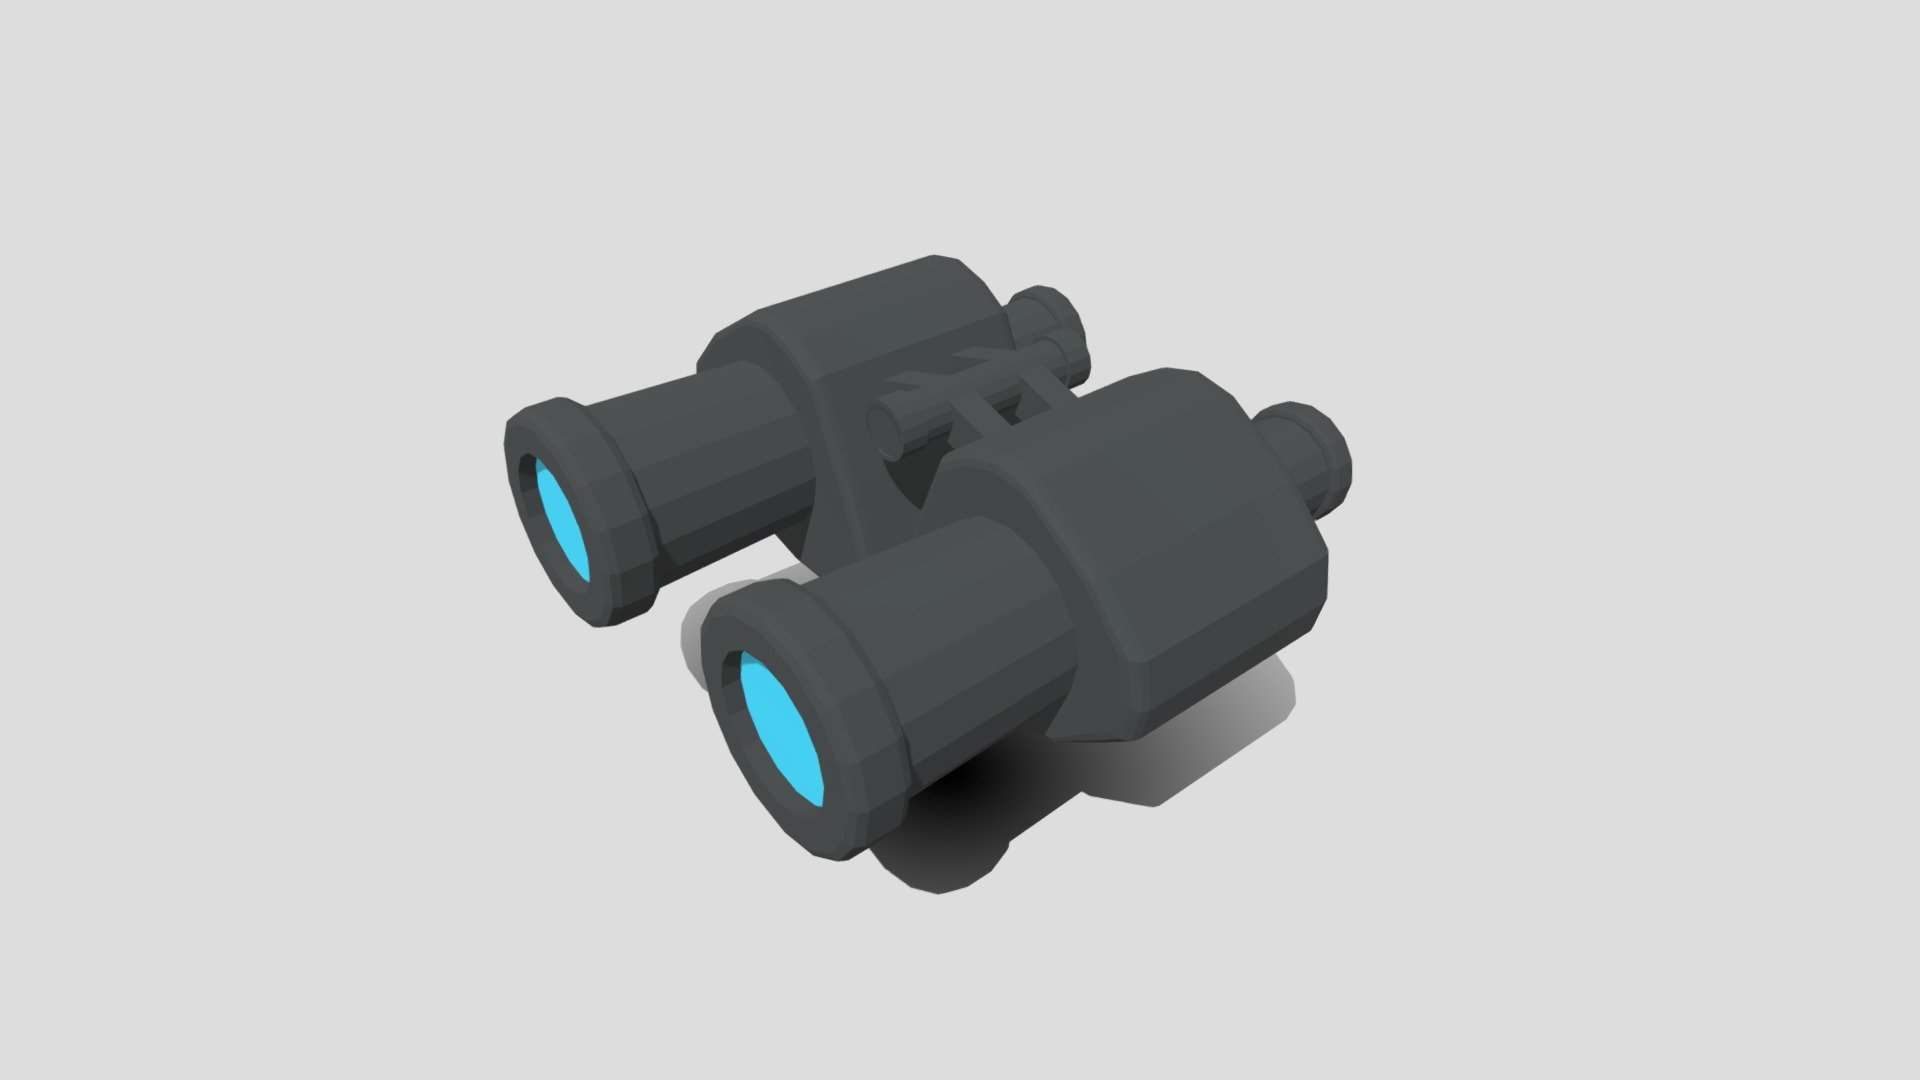 This is a low poly 3D model of bonoculars. The low poly binoculars was modeled and prepared for low-poly style renderings, background, general CG visualization presented as a mesh with quads only.

Verts : 1.266 Faces : 1.216.

The 3D model have simple materials with diffuse colors.

No ring, maps and no UVW mapping is available.

The original file was created in blender. You will receive a 3DS, OBJ, FBX, blend, DAE, Stl, gLTF.

All preview images were rendered with Blender Cycles. Product is ready to render out-of-the-box. Please note that the lights, cameras, and background is only included in the .blend file. The model is clean and alone in the other provided files, centred at origin and has real-world scale 3d model